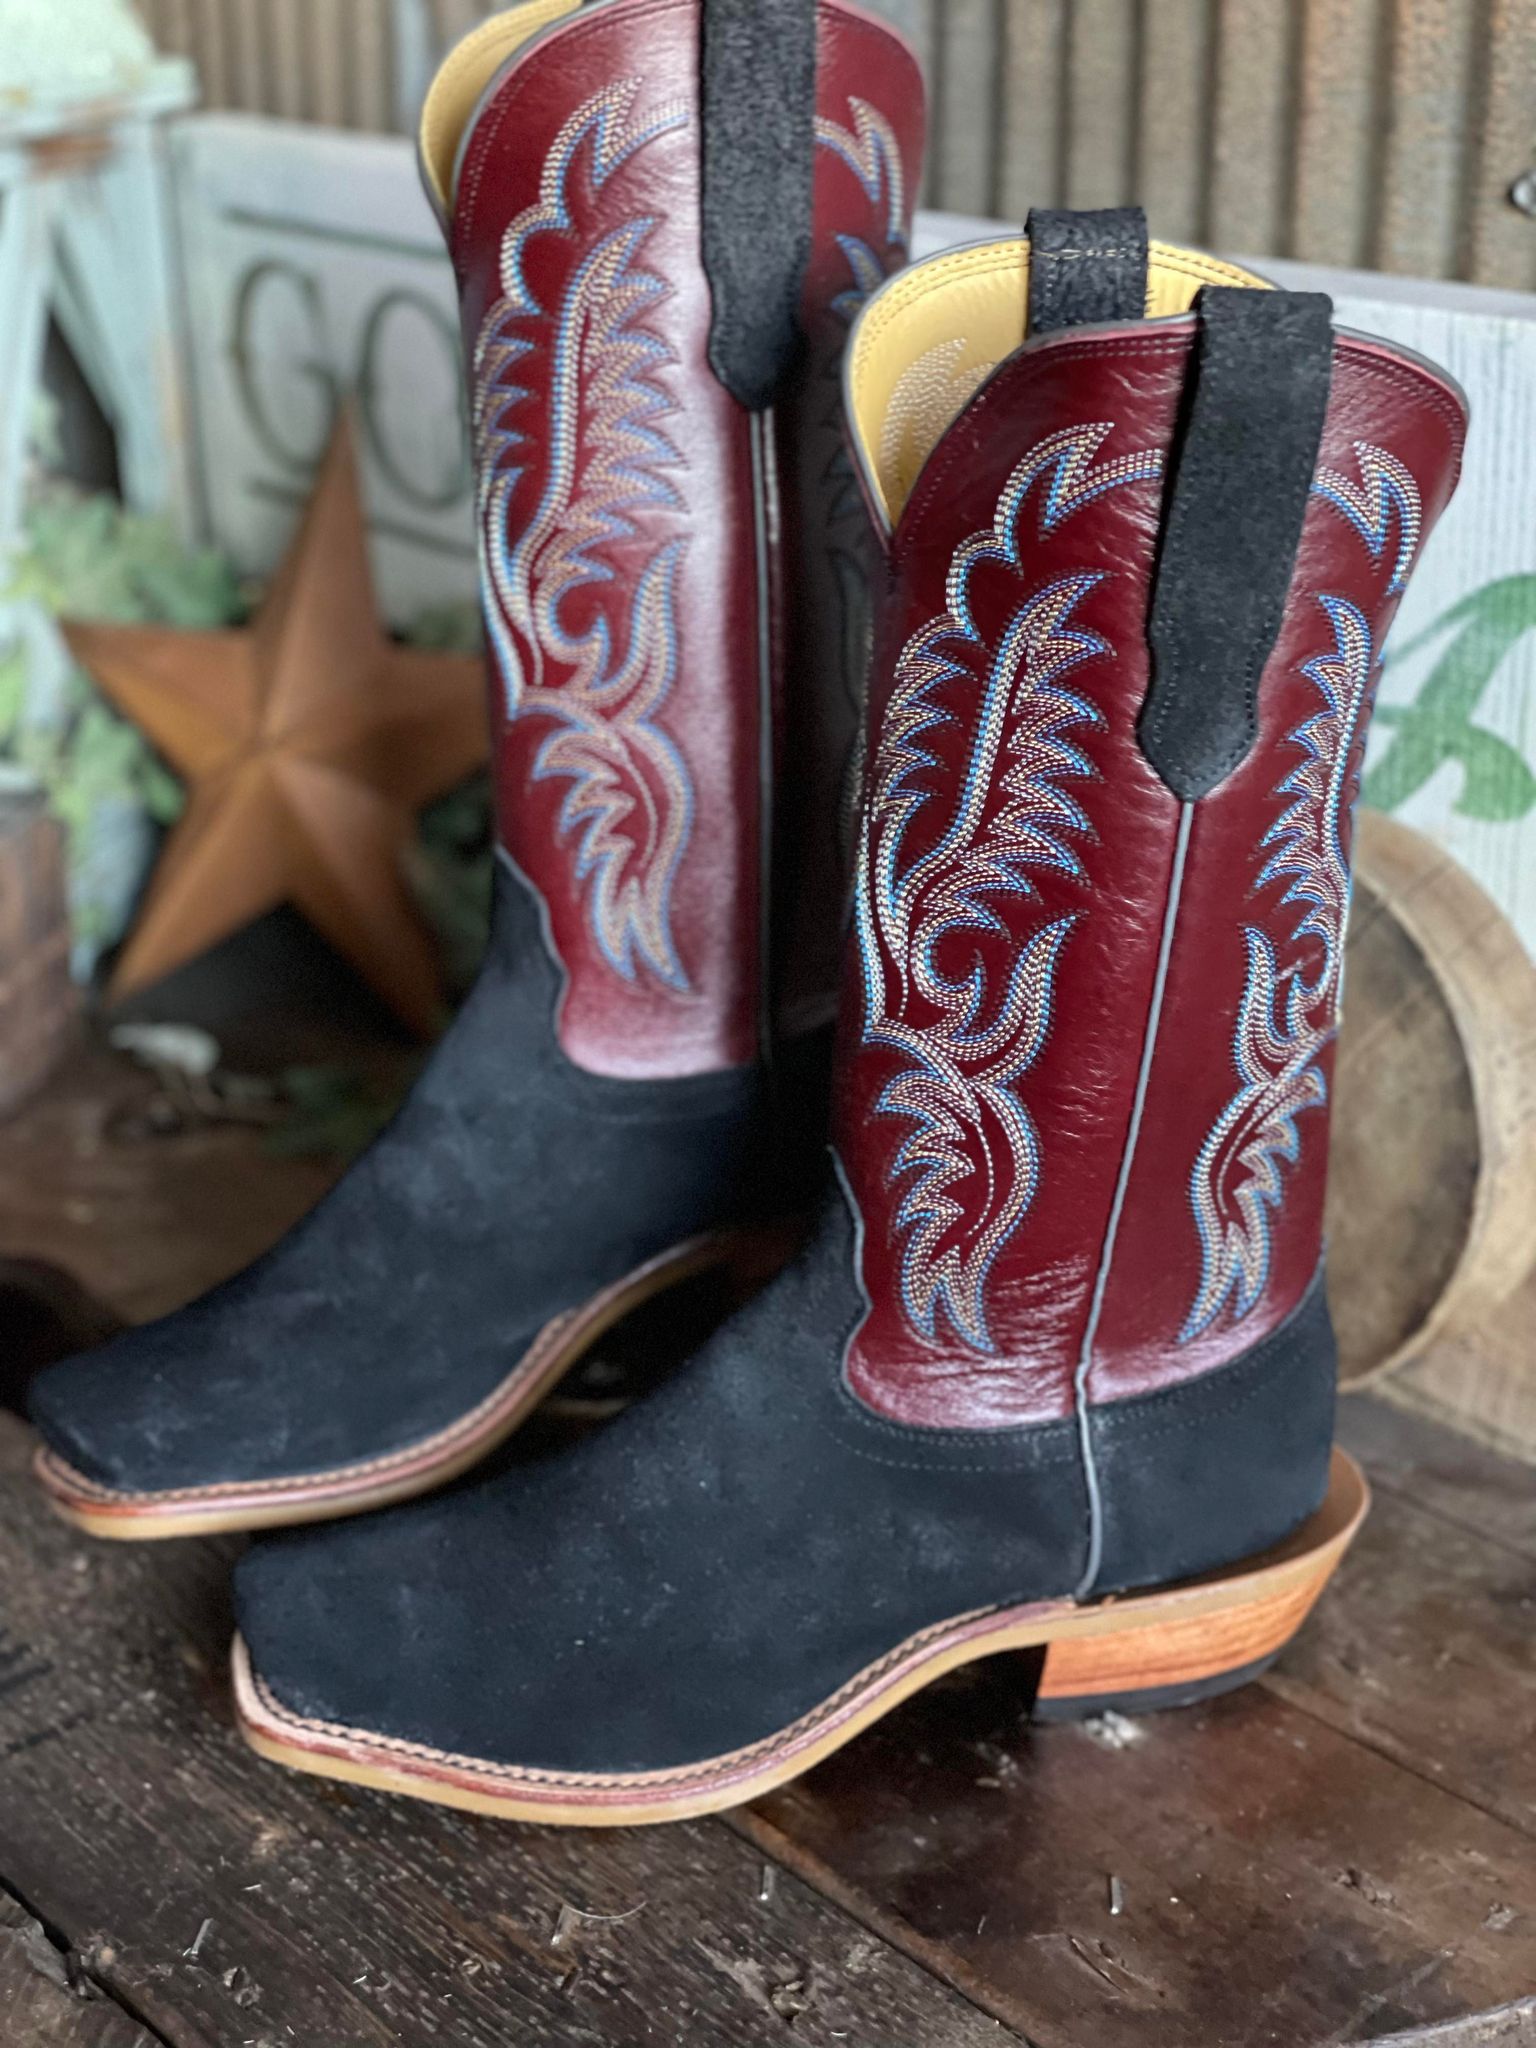 Fenoglio Black Victorian Rough Out & Burgundy Cutter Toe Boots-Men's Boots-Fenoglio Boots-Lucky J Boots & More, Women's, Men's, & Kids Western Store Located in Carthage, MO